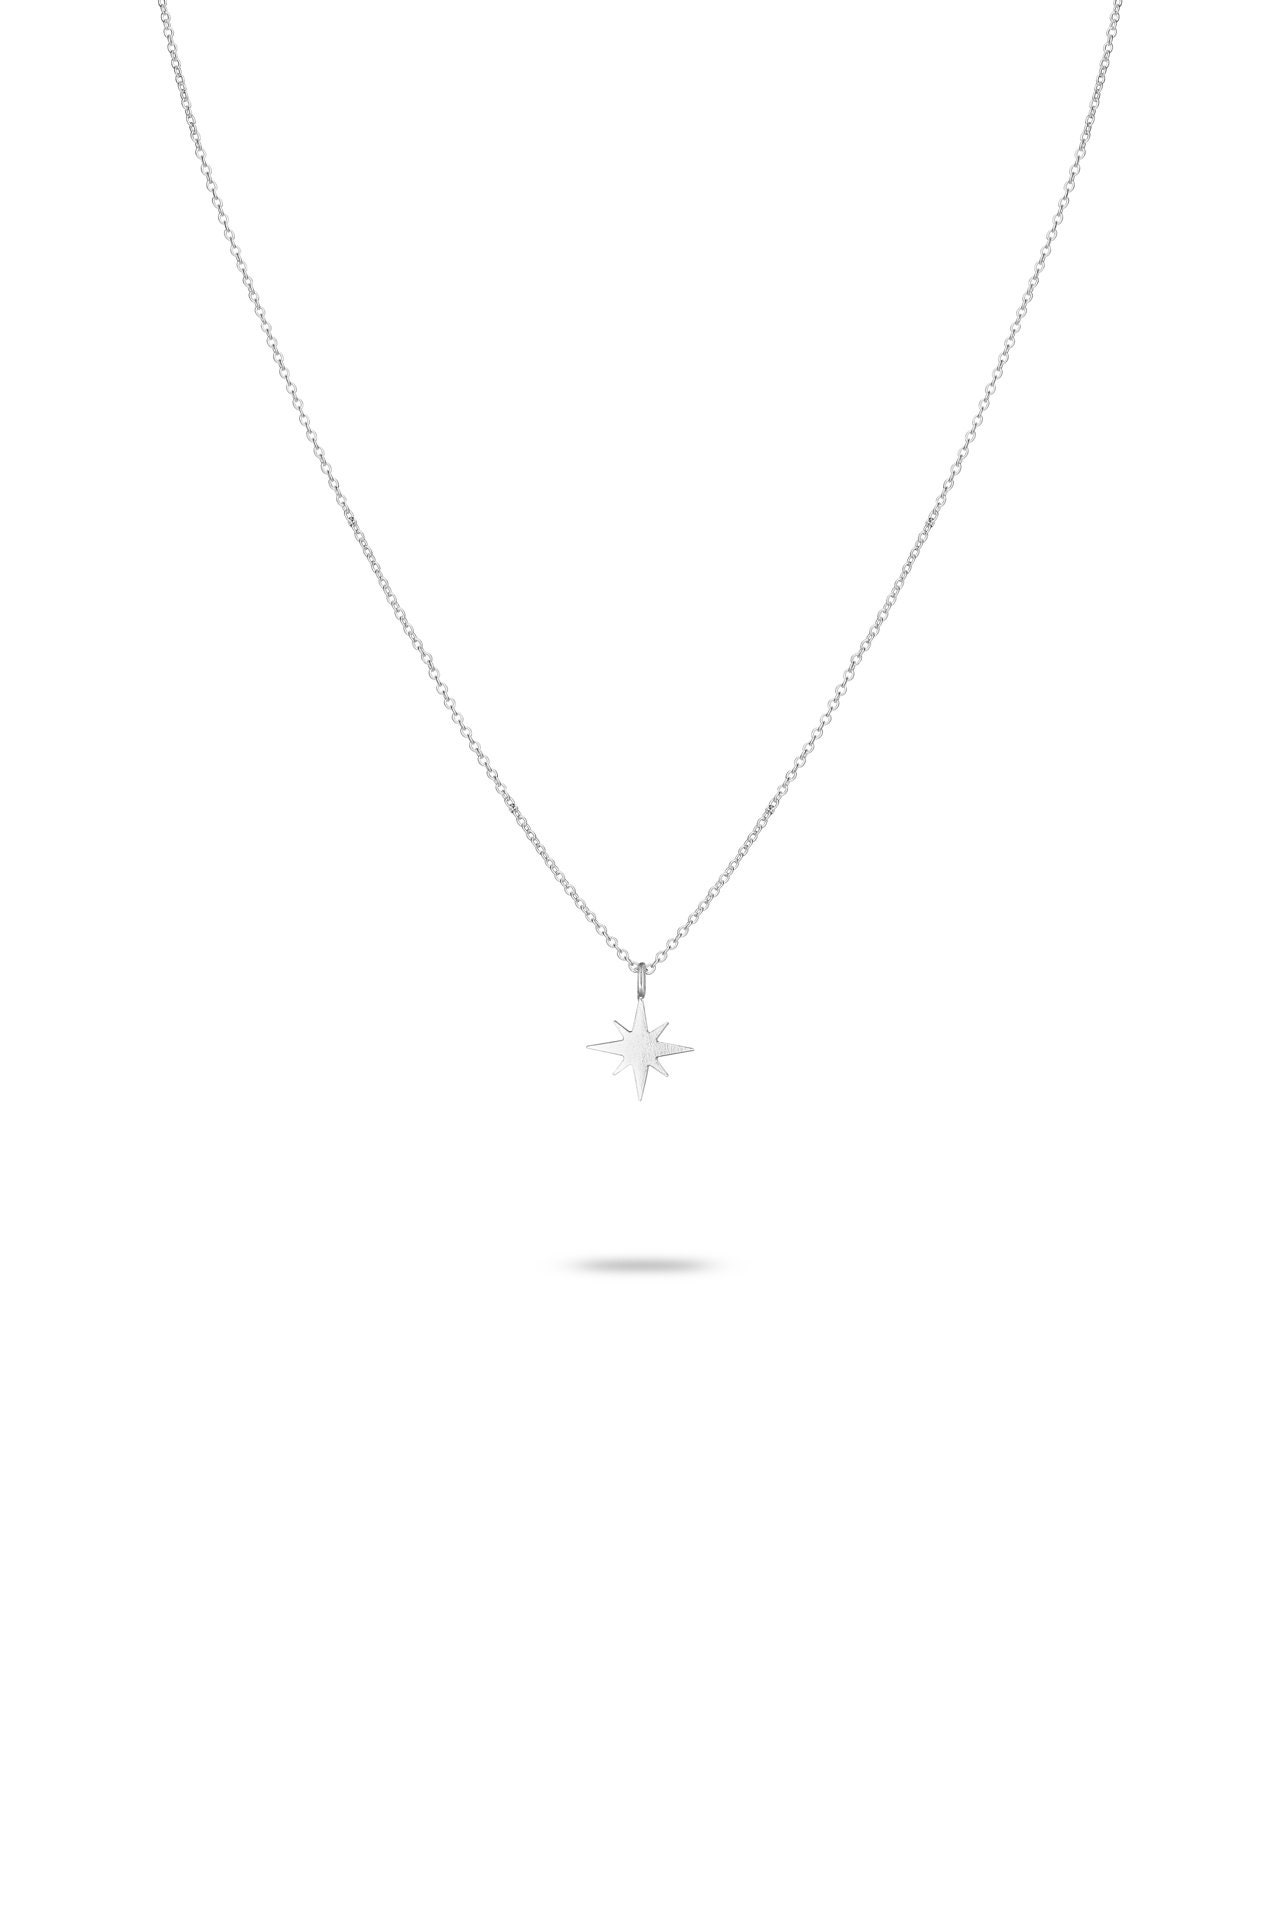 Silver Stella Necklace, Star Necklace, Silver Star, Jewellery, Christmas Gift, Jewellery